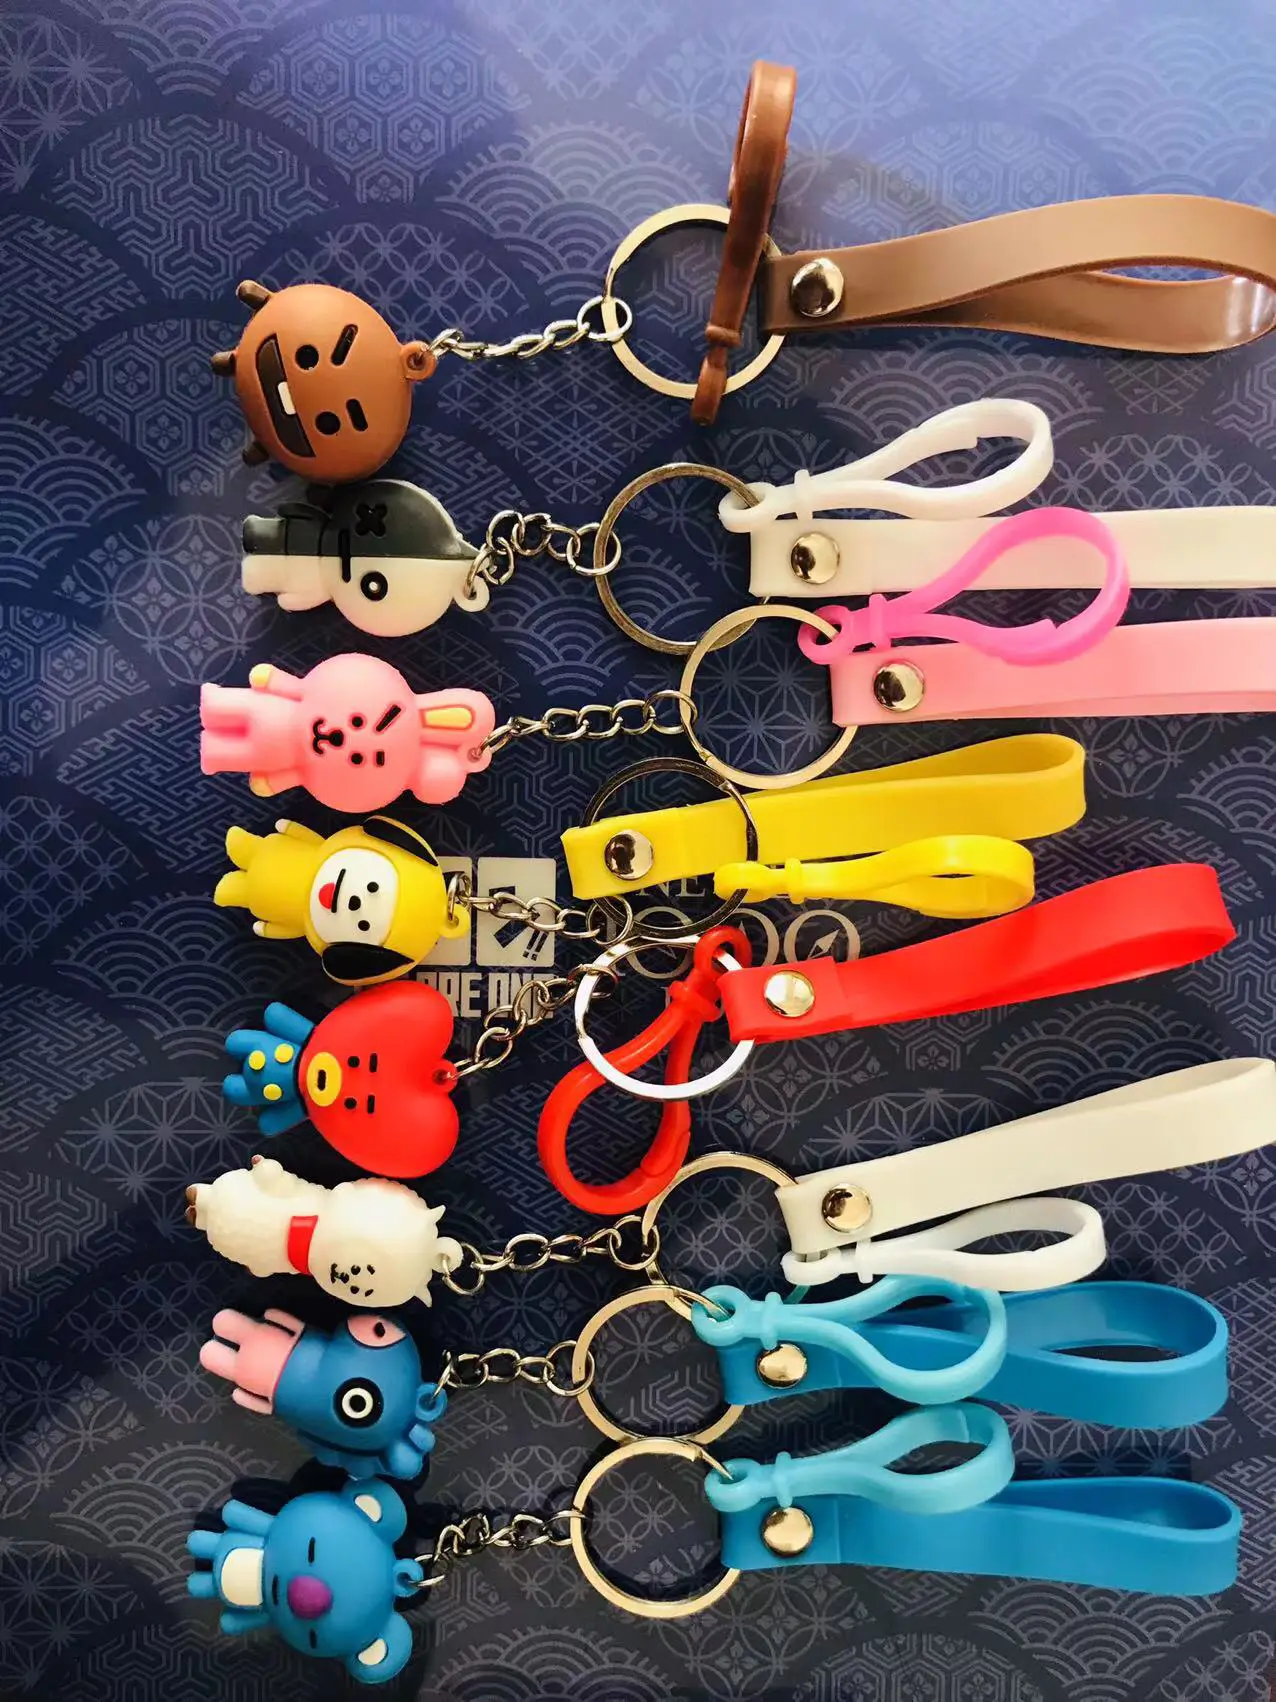 BTS BT21 Character Key Holder Strap [Set of 8] | Gallery posted by